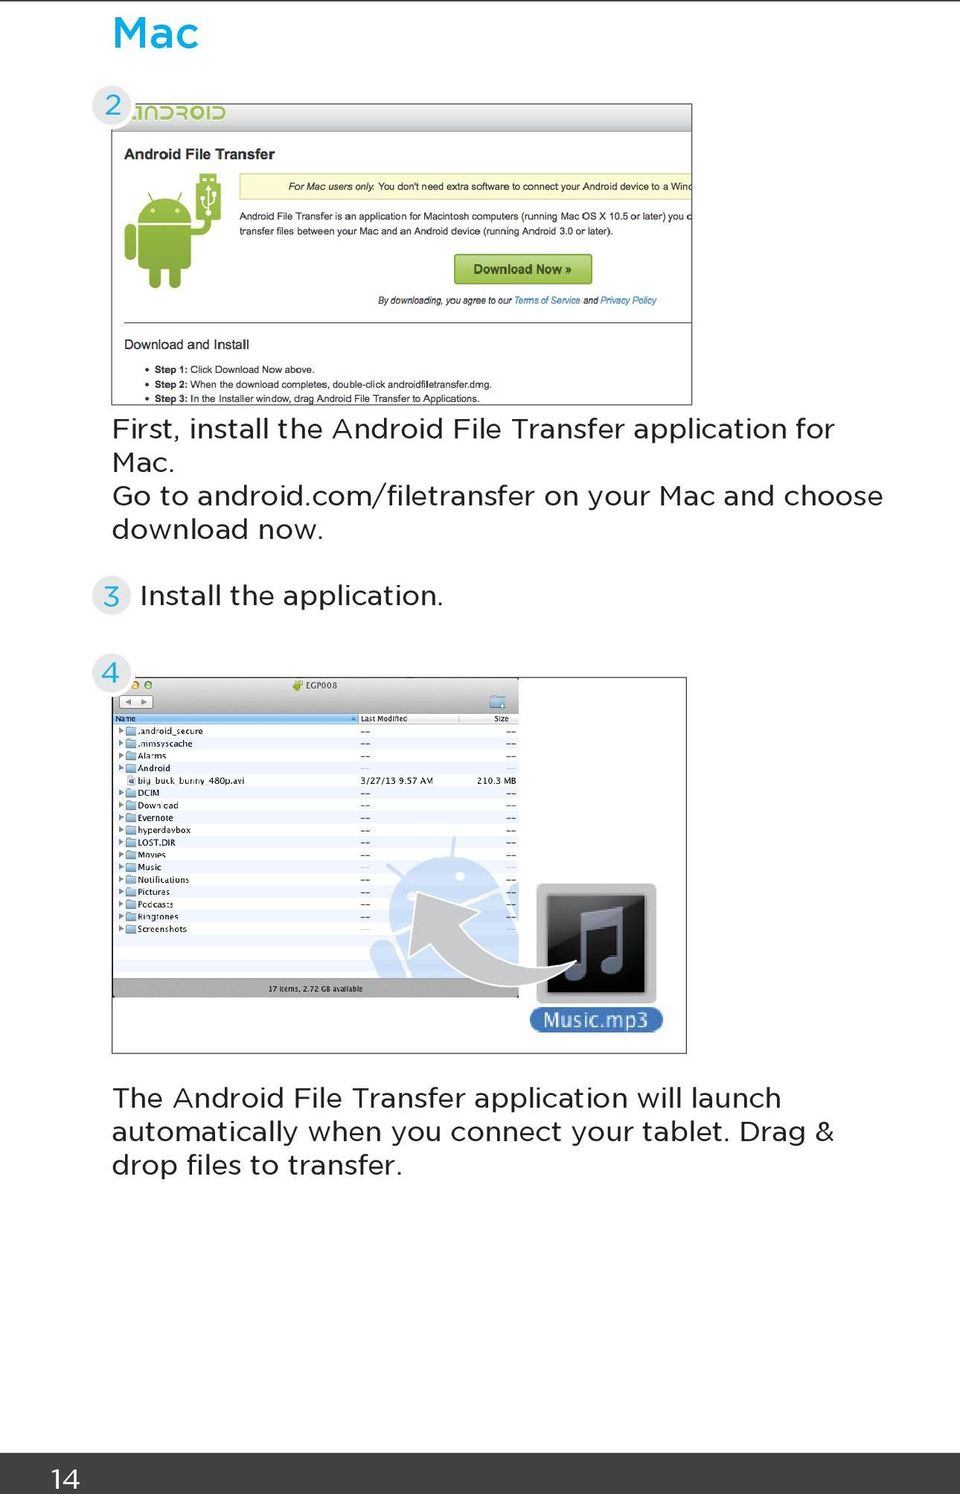 3 Install the application.